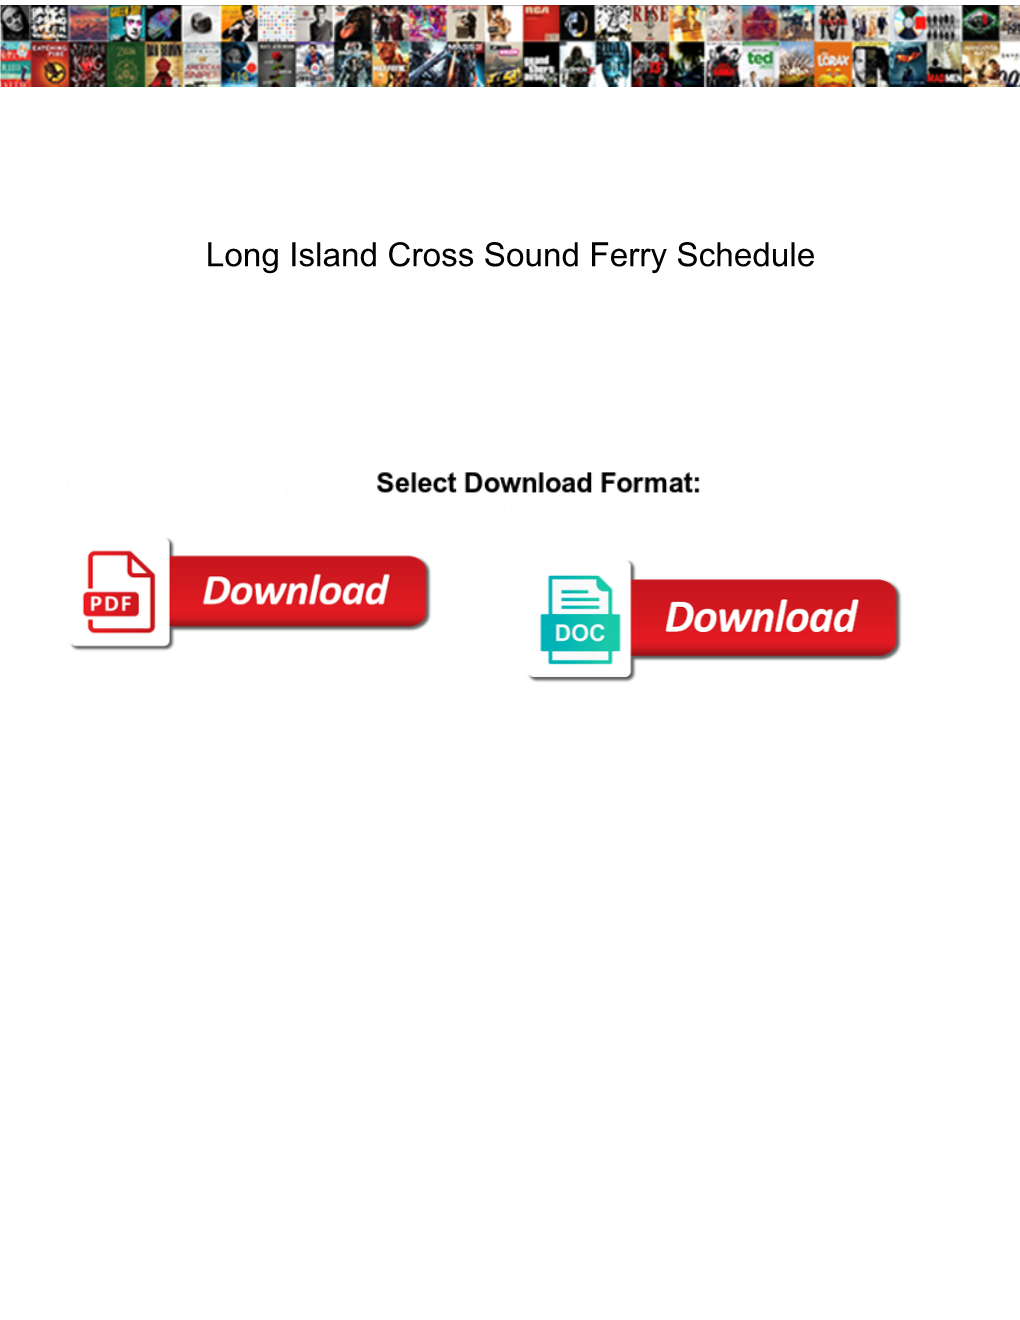 Long Island Cross Sound Ferry Schedule Detected